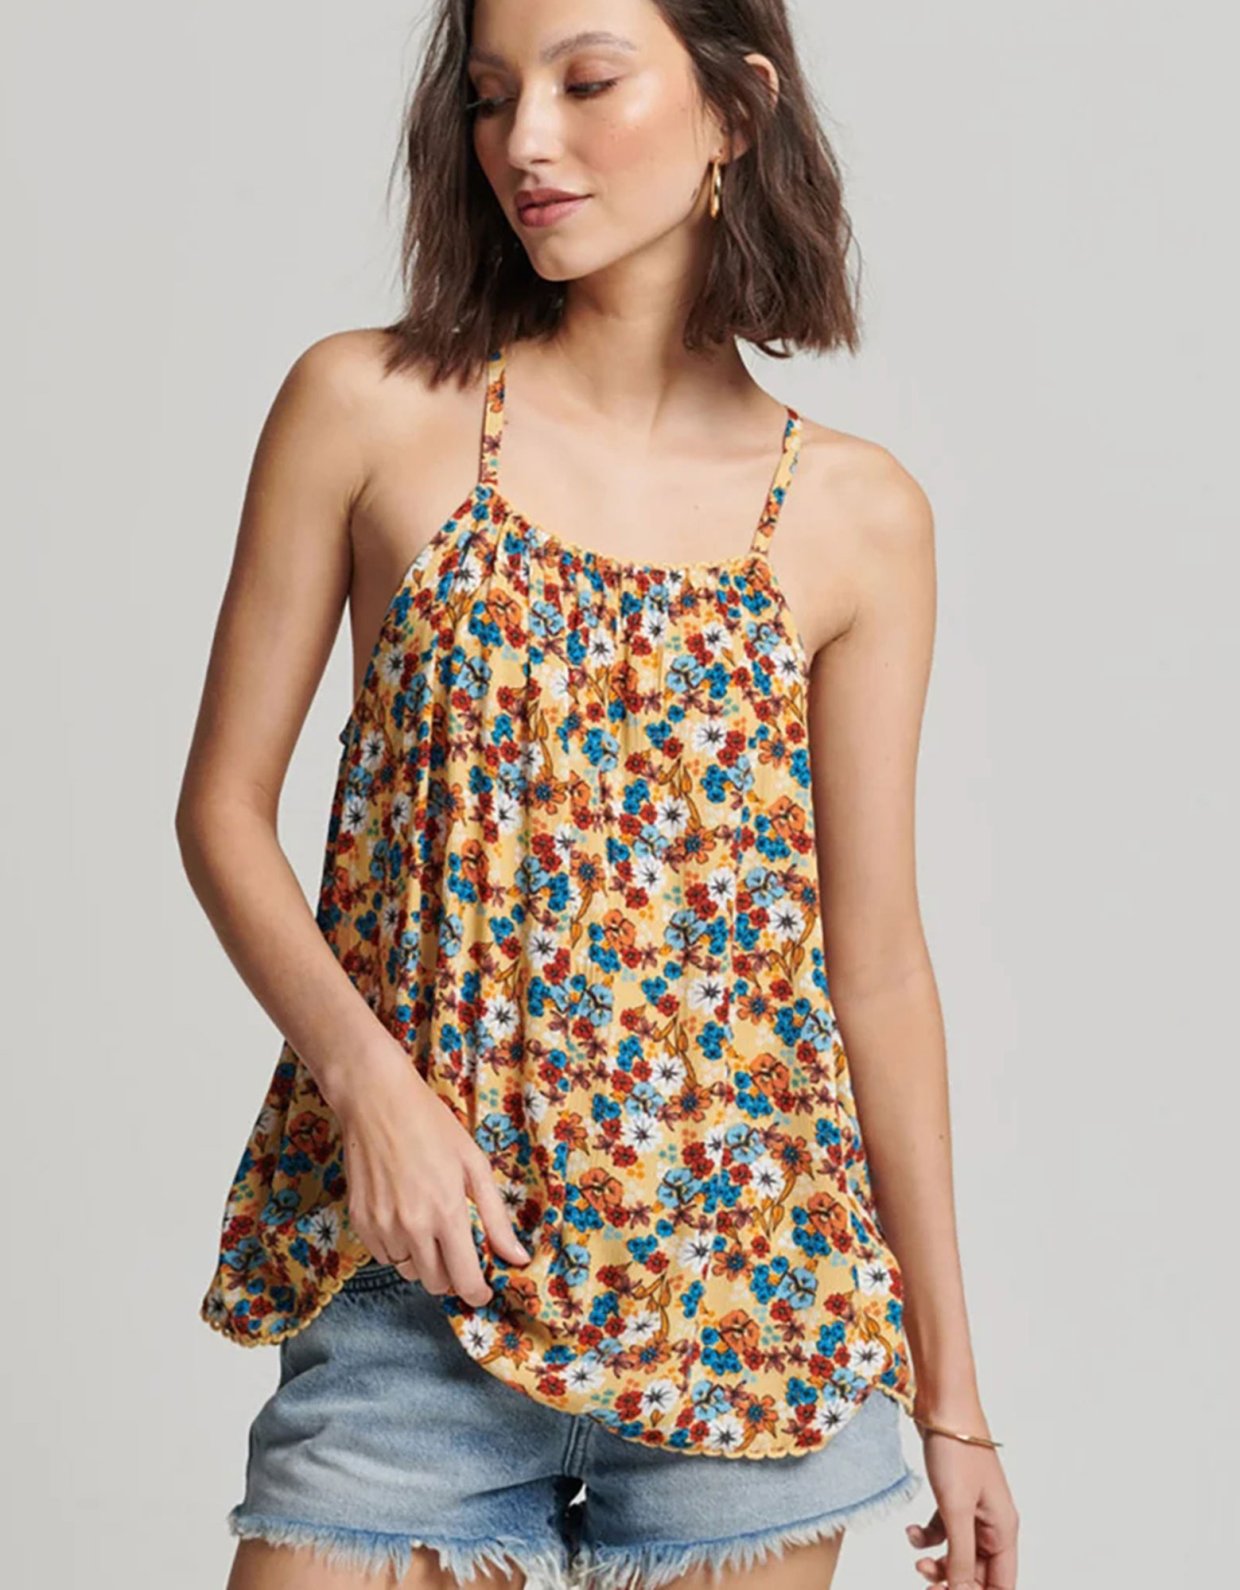 Superdry Ovin vintage halter beach cami top 70’s yellow floral